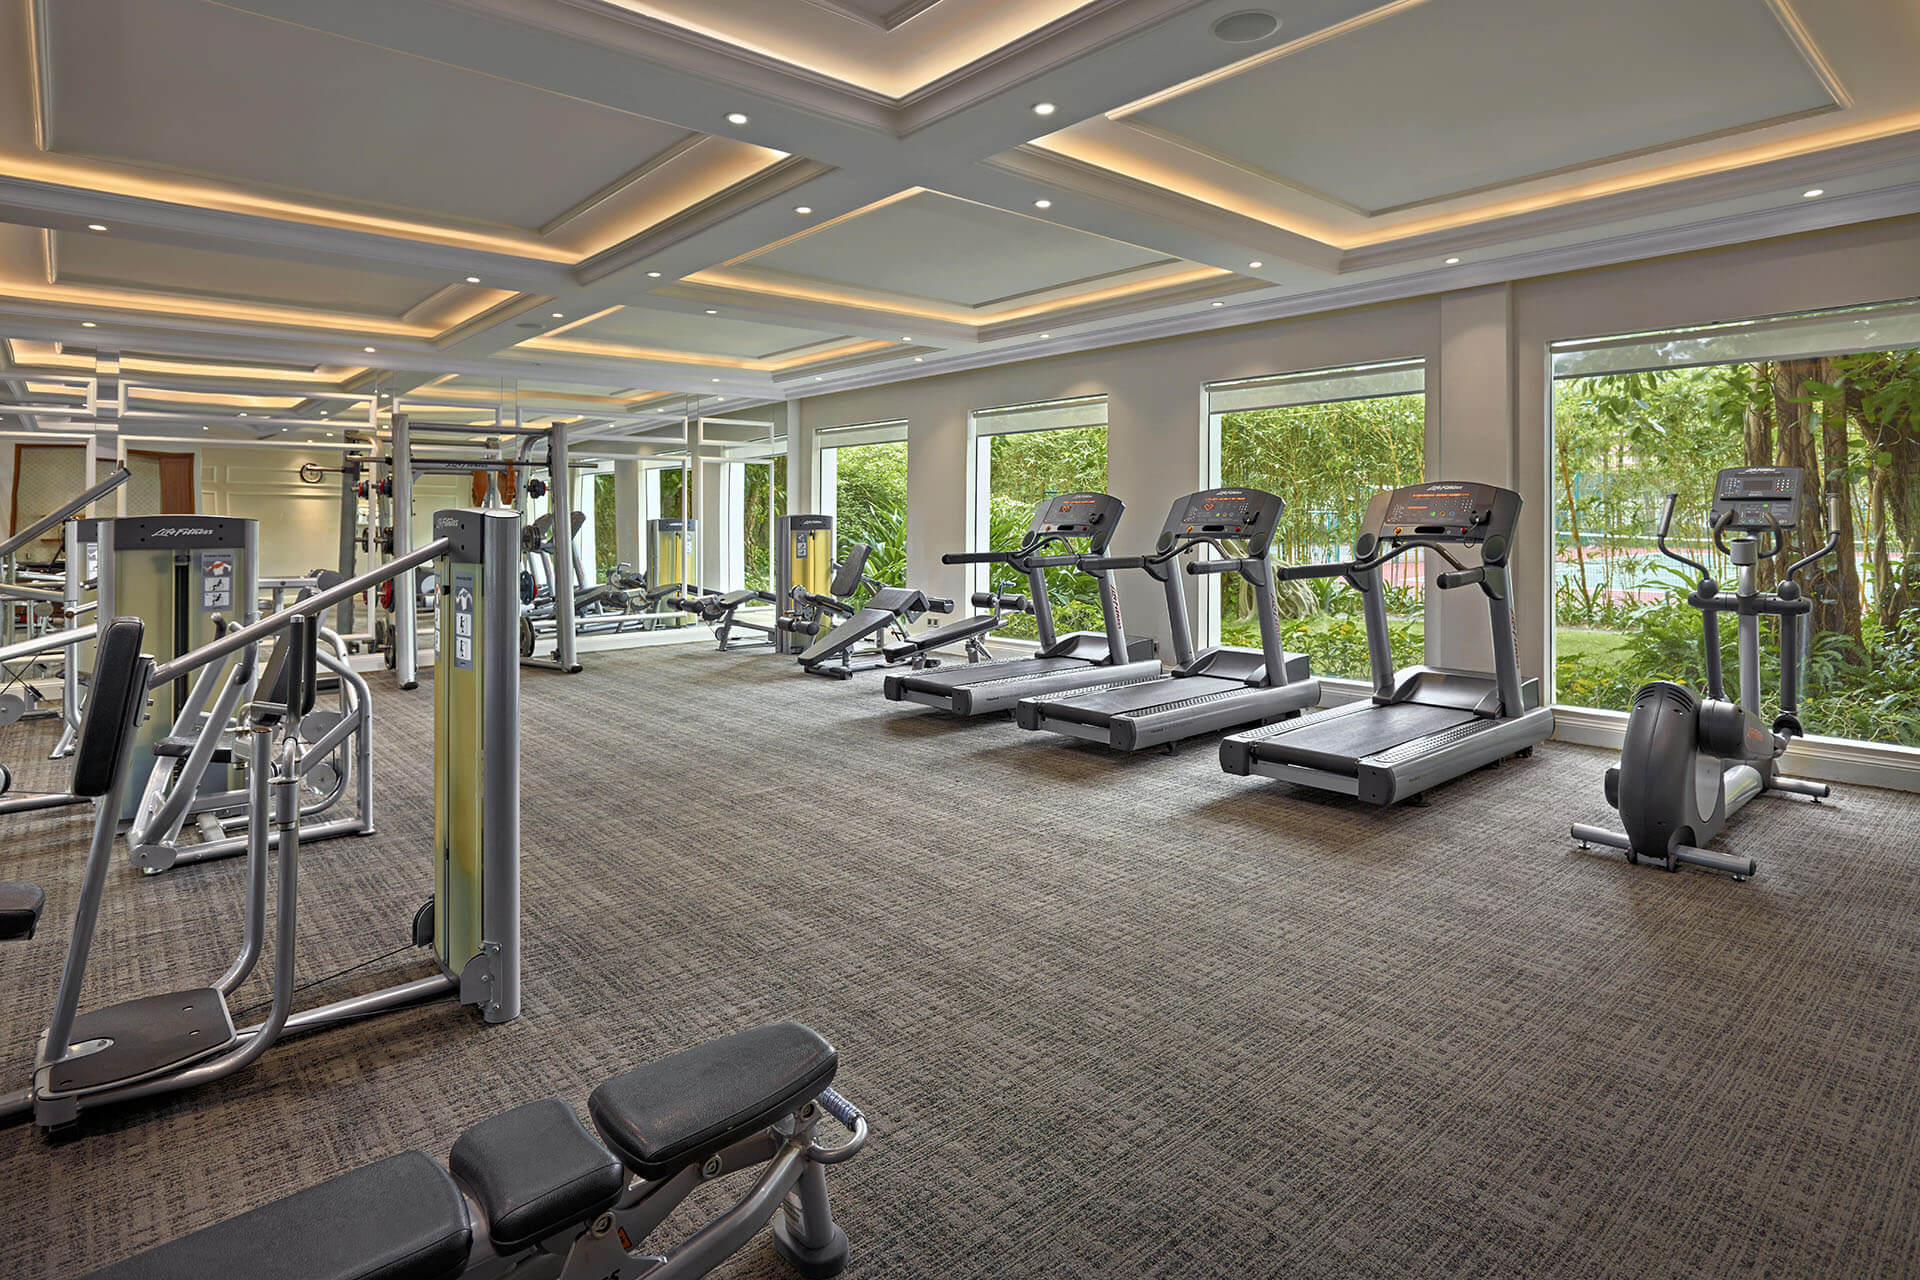 The Fitness Center